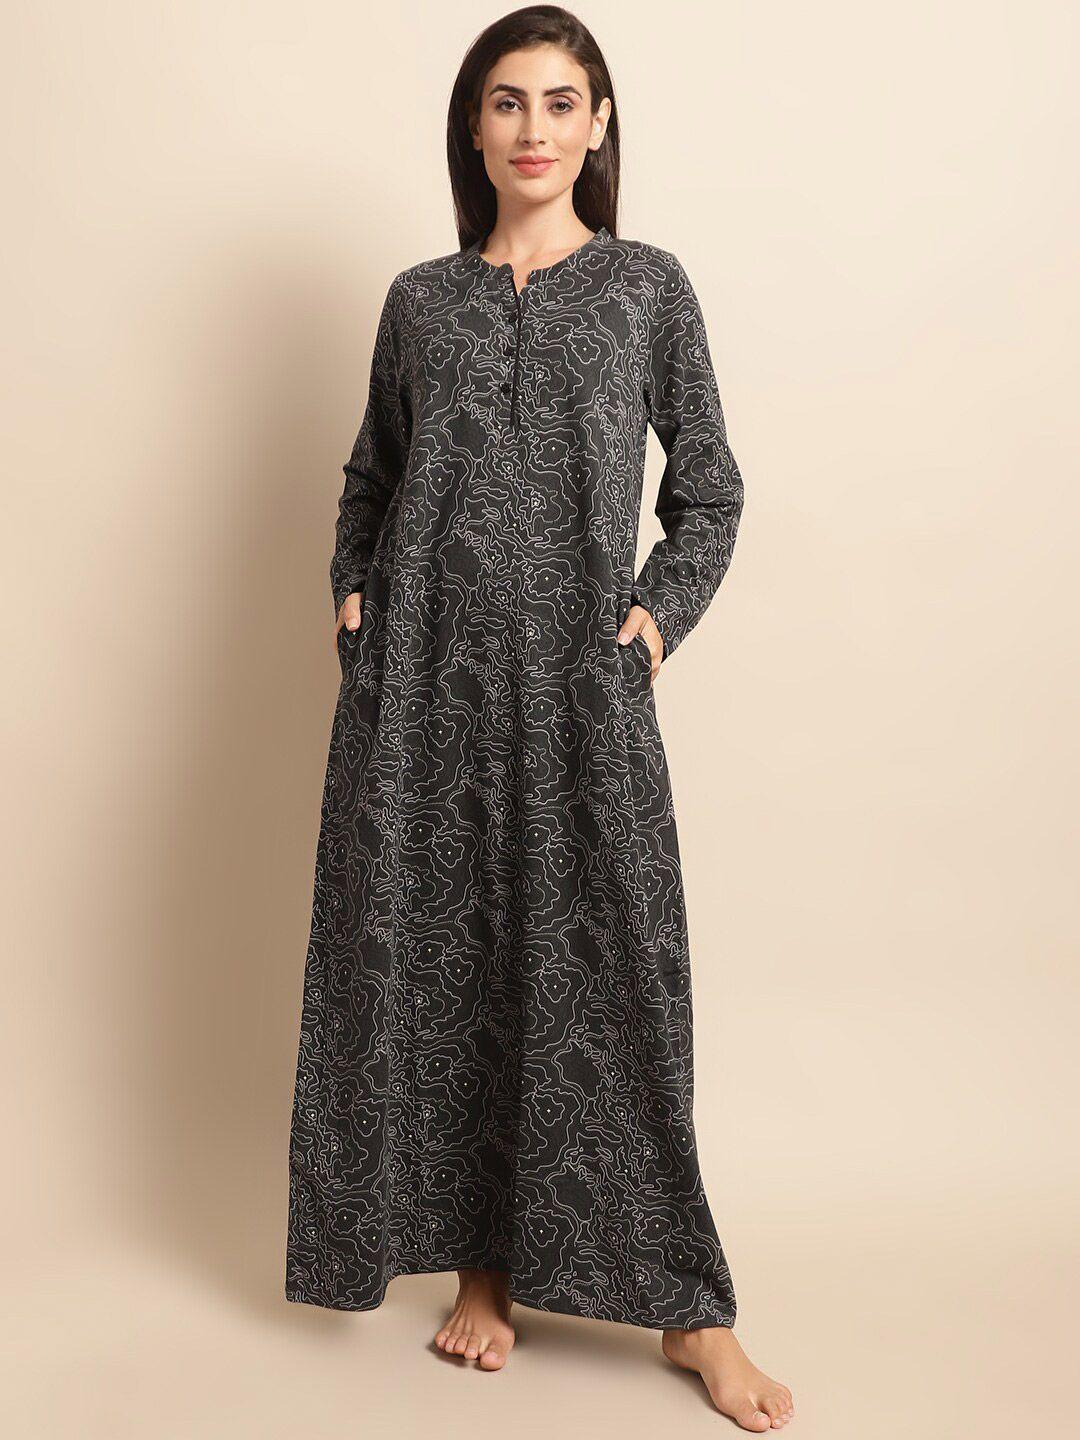 kanvin black abstract printed pure cotton maxi nightdress